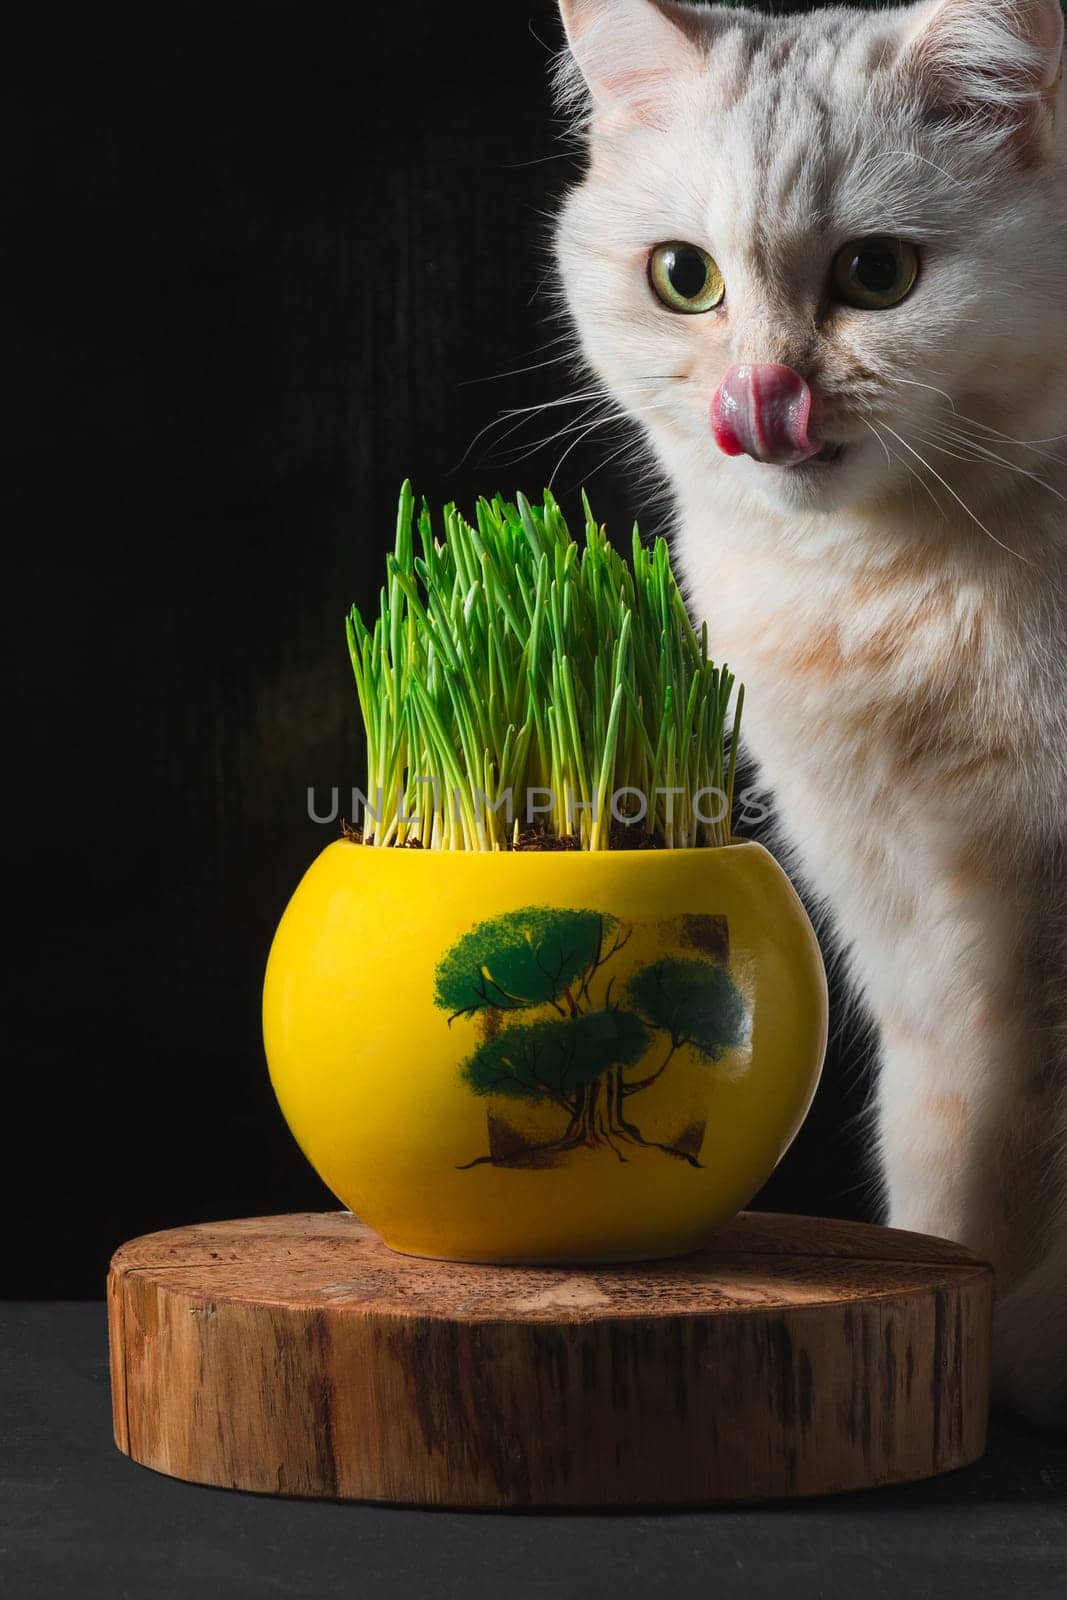 A white cat licks the green grass in a yellow pot